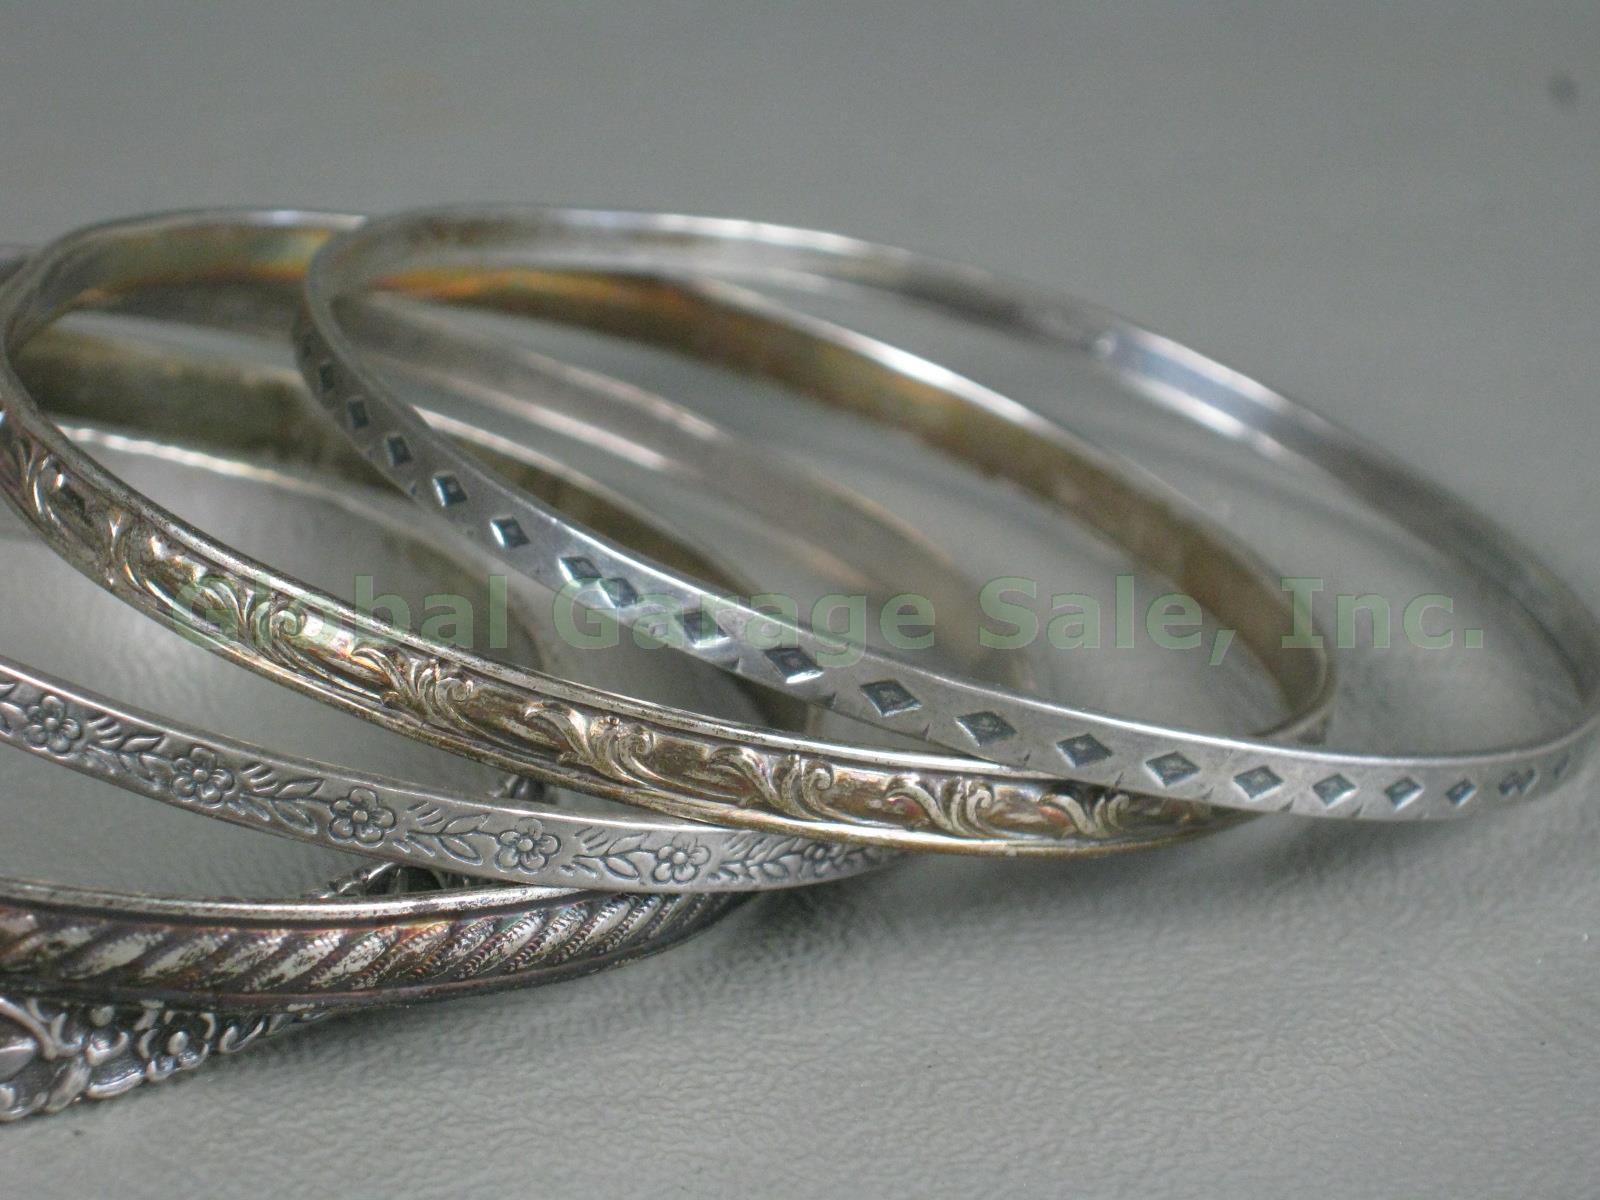 10 Vtg Sterling Silver Bangle Bracelets Lot 4.6 Ounces Braided Woven Rope Floral 4